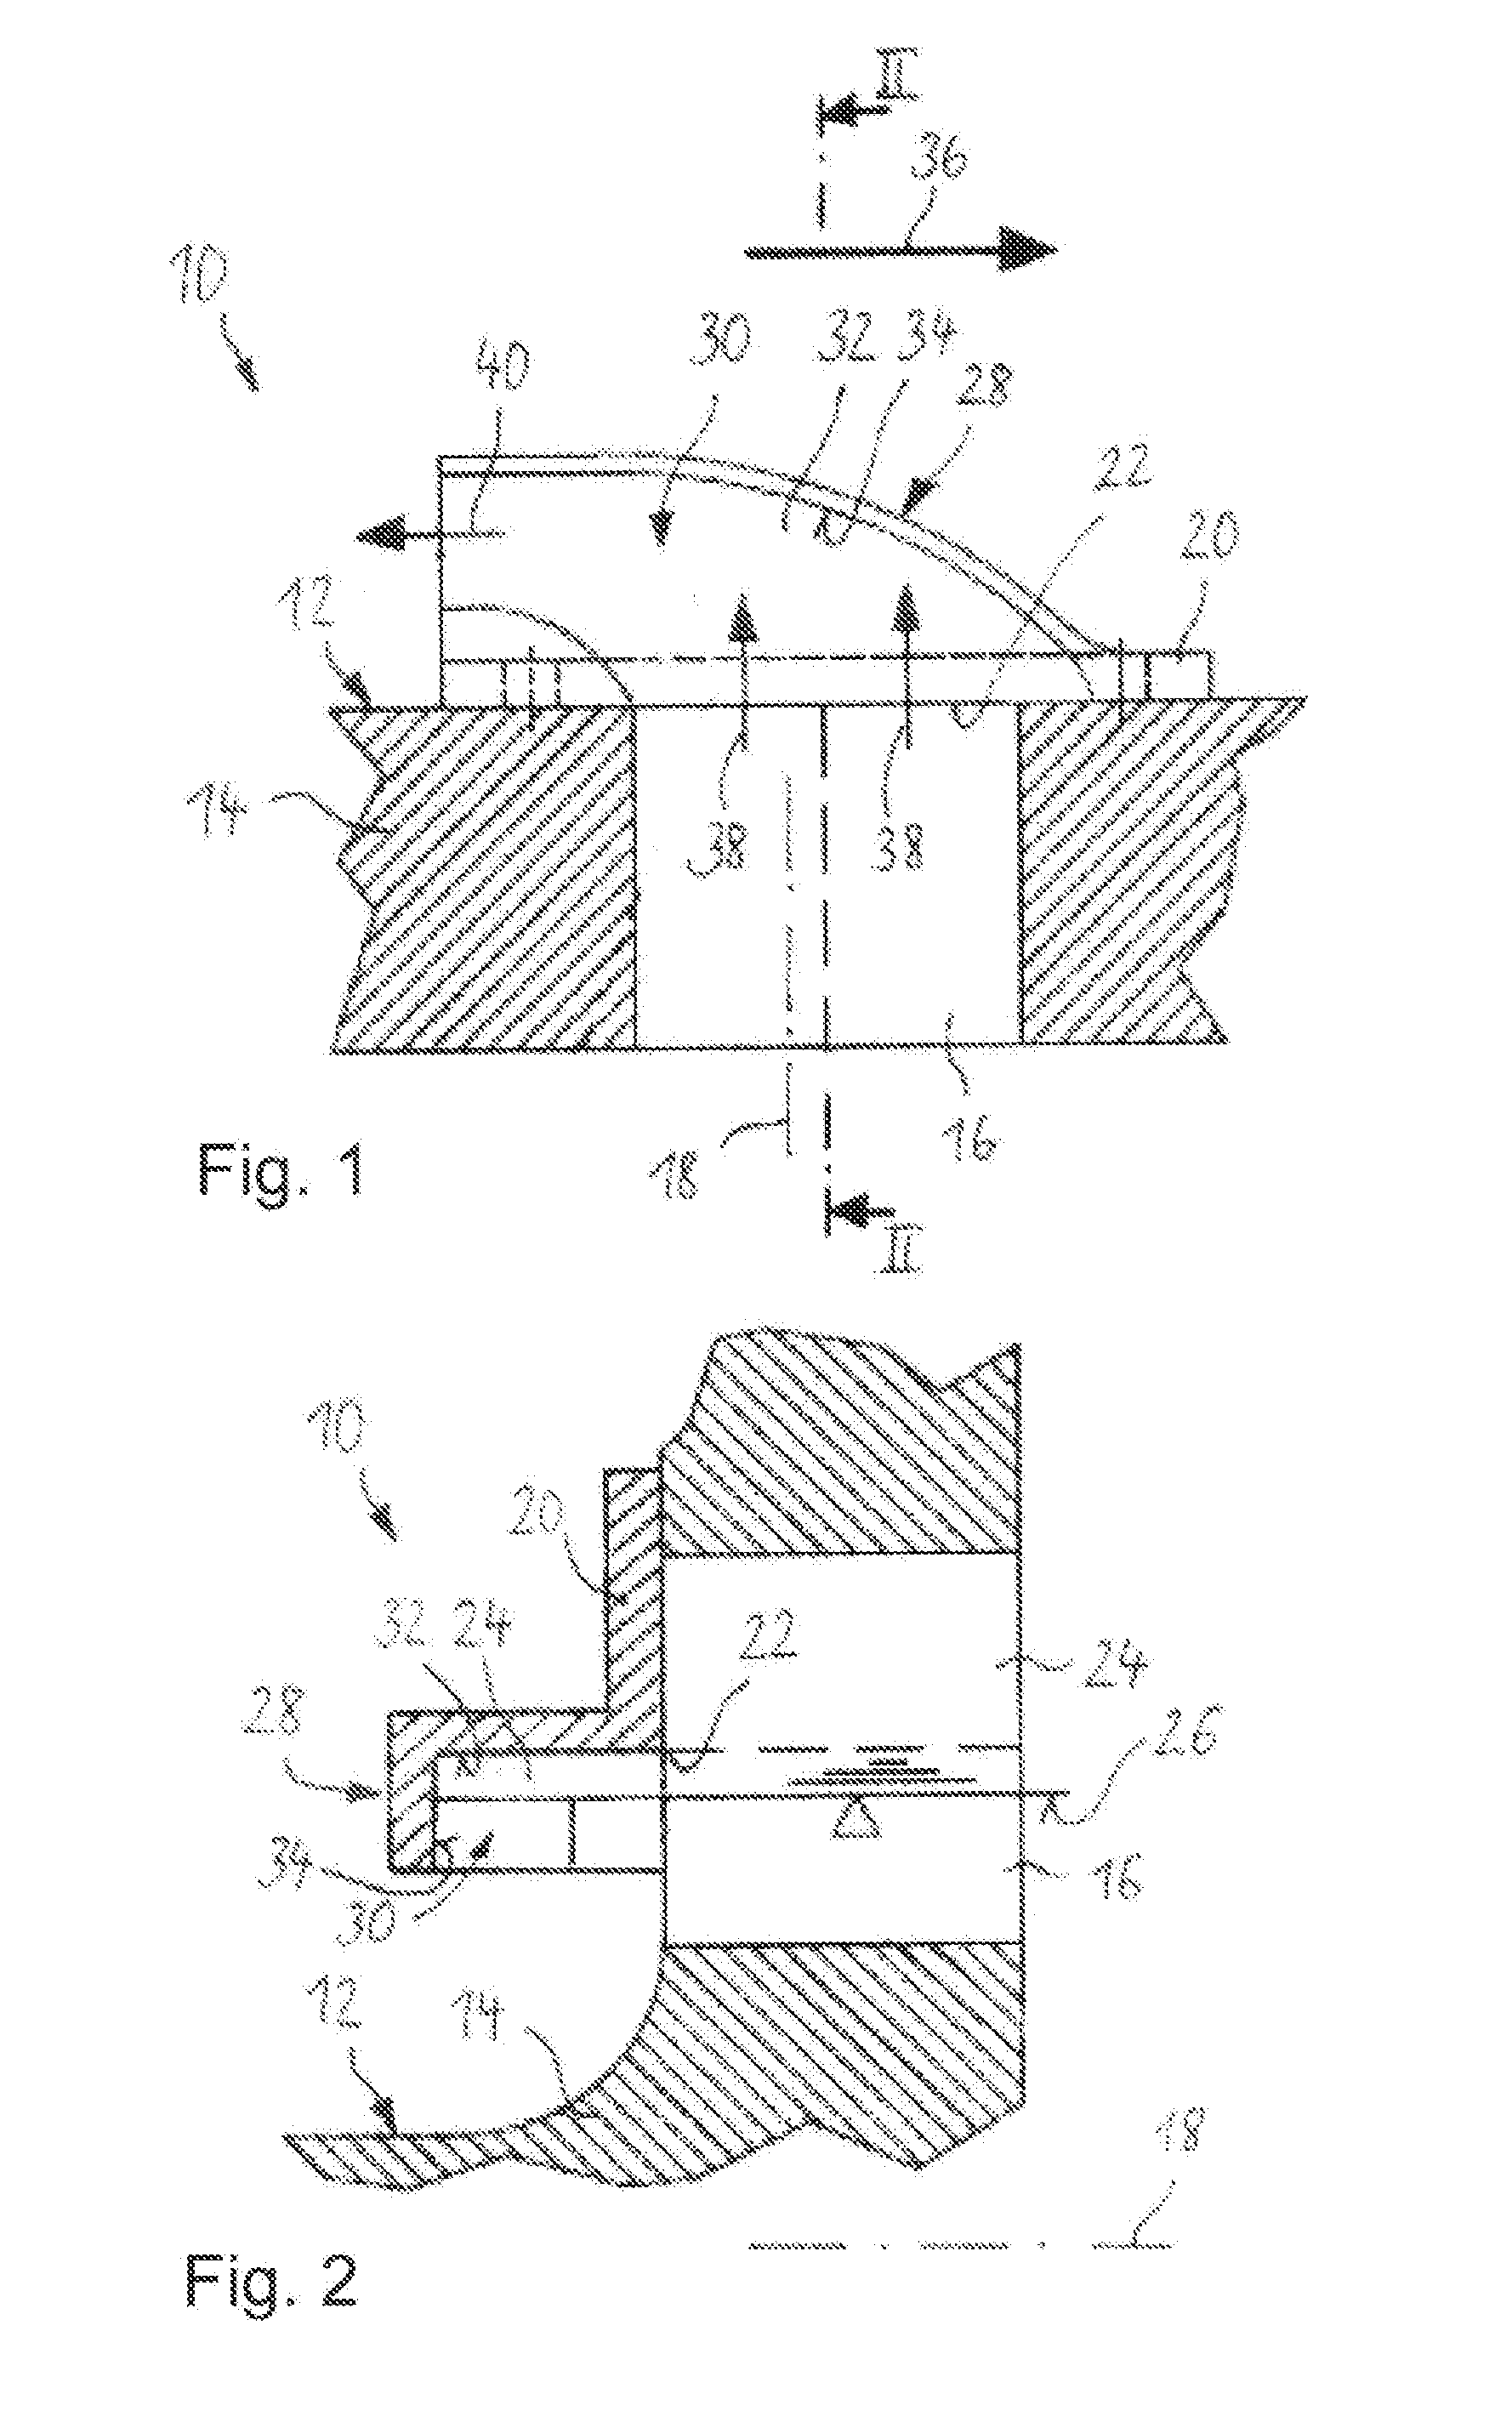 Solid-wall scroll centrifuge having an energy recovery device